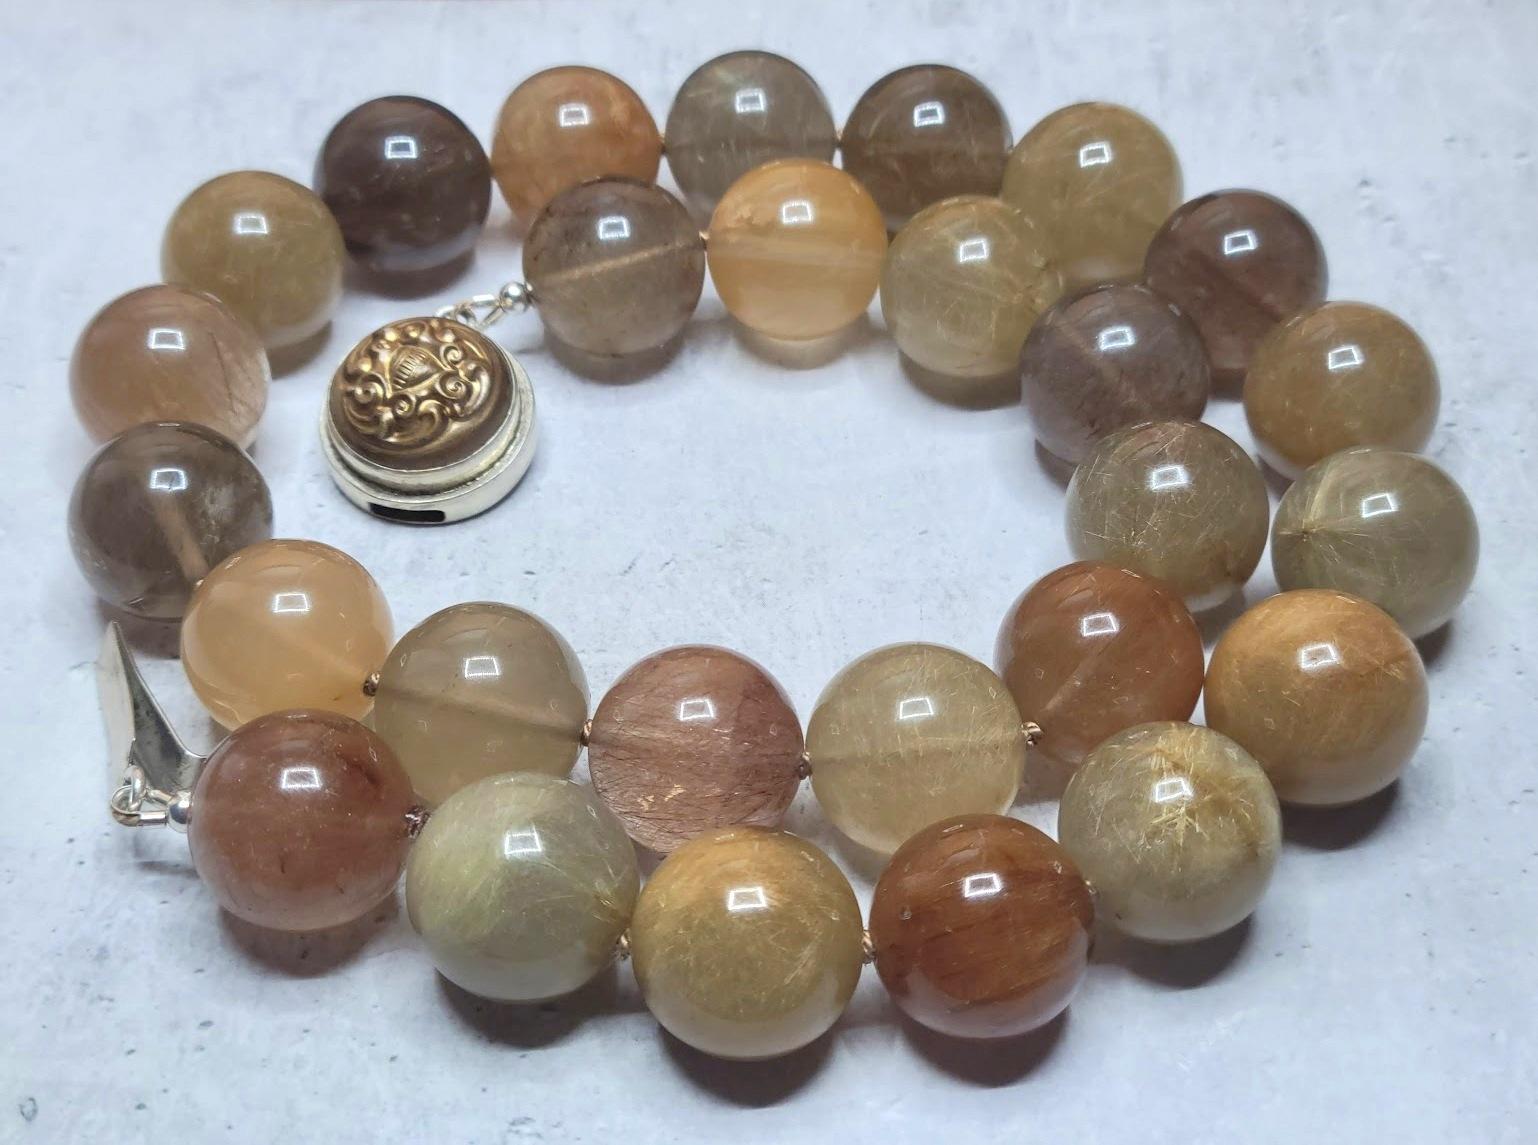 We are excited to present our addition to the collection - a stunning Rutilated Quartz necklace. Measuring 22 inches (56 cm) in length, this necklace is made of smooth round beads (20mm) in a rich reddish-brown, caramel, gold, and silky pink color.